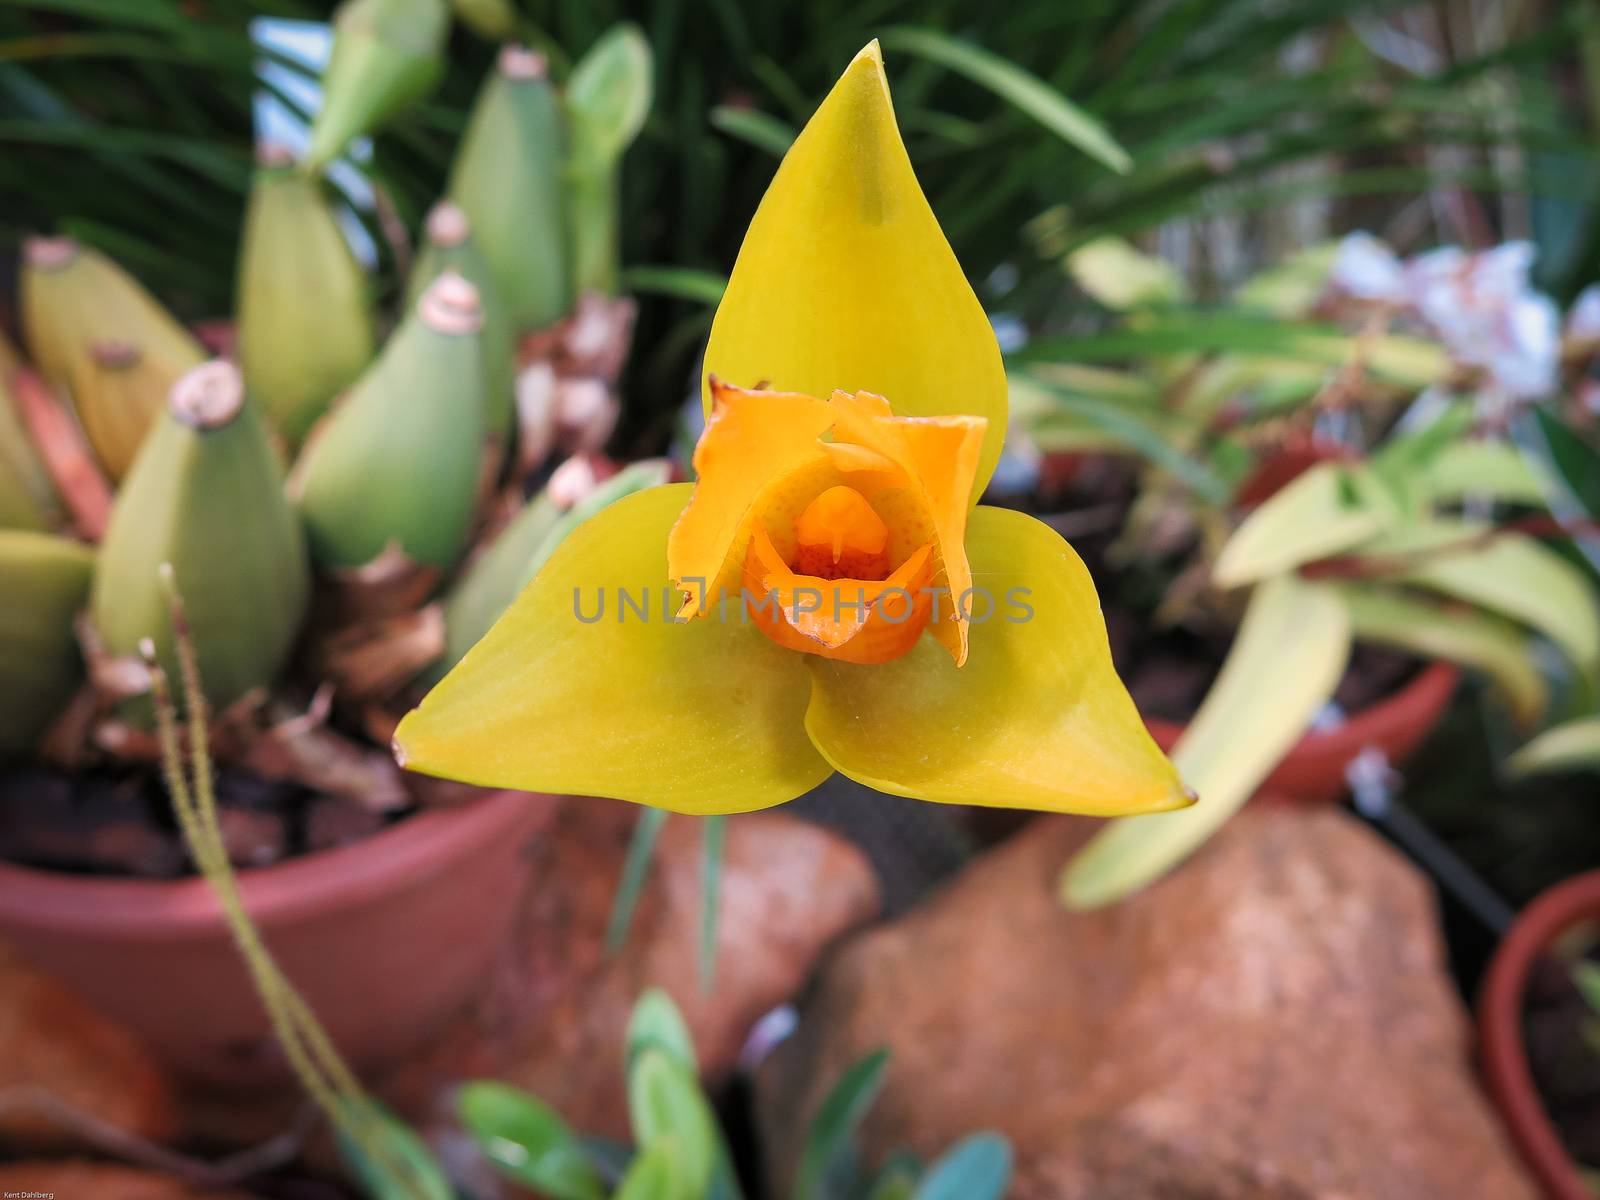 Lycaste ciliata a very beutiful orchid live almost in south america